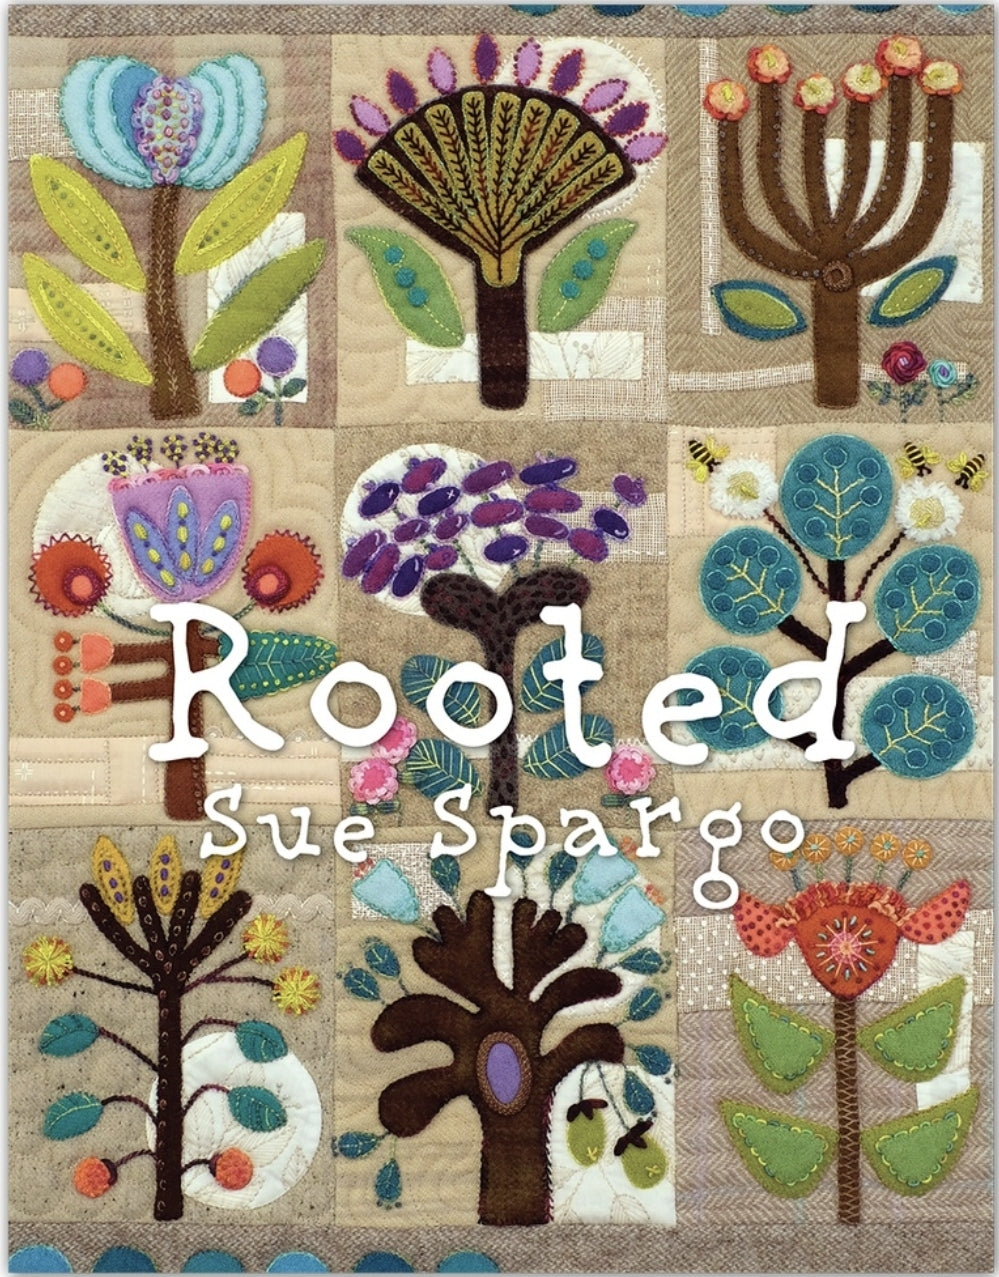 Rooted book by Sue Spargo